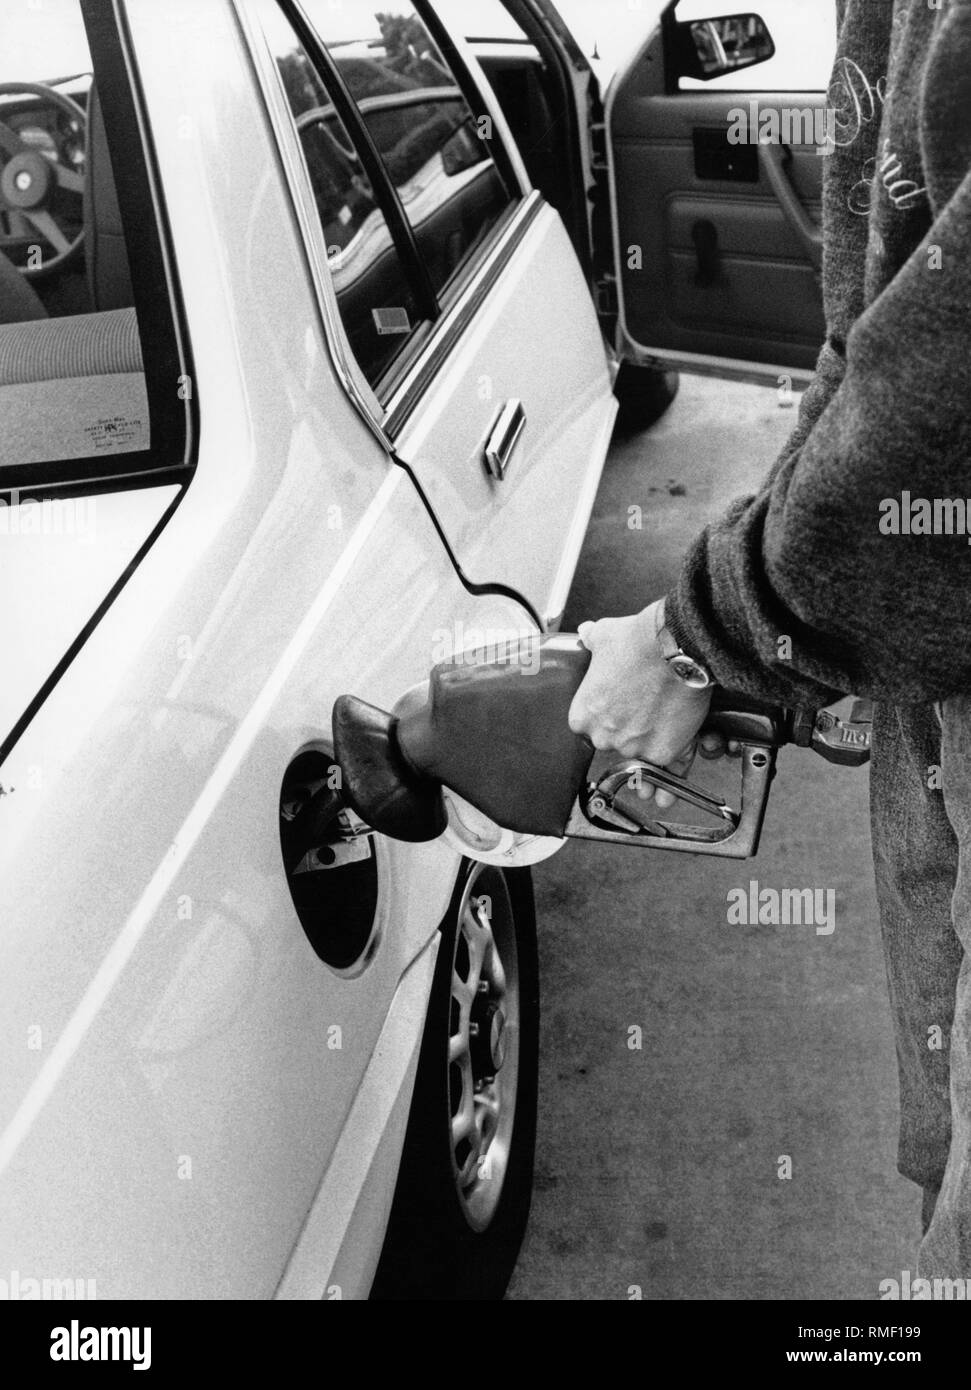 Fuel nozzle with gas recirculation. It should aspirate carcinogenic benzene vapors during refueling. Stock Photo